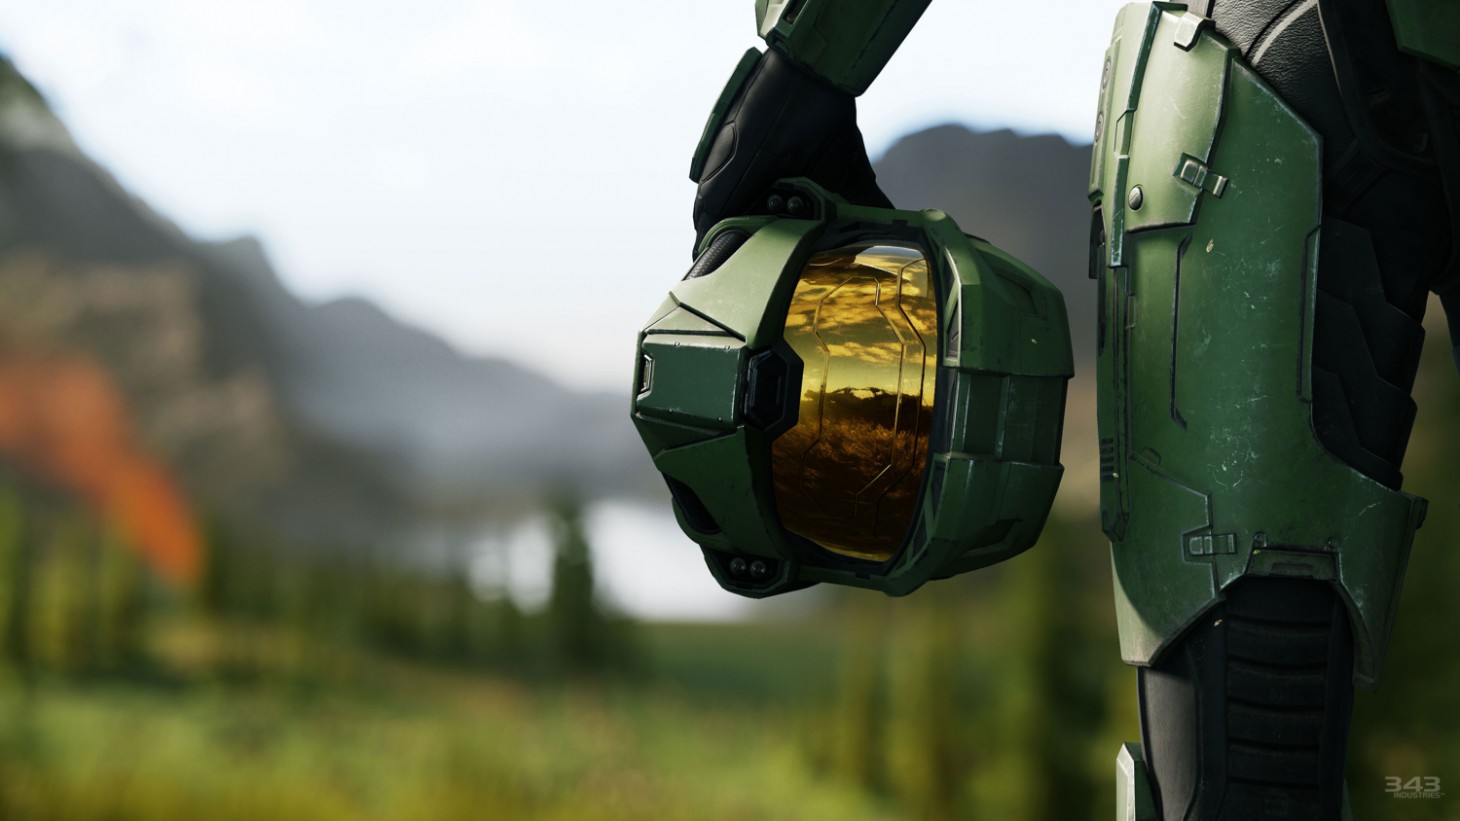 Why The Halo TV Show Isn't Working - Game Informer